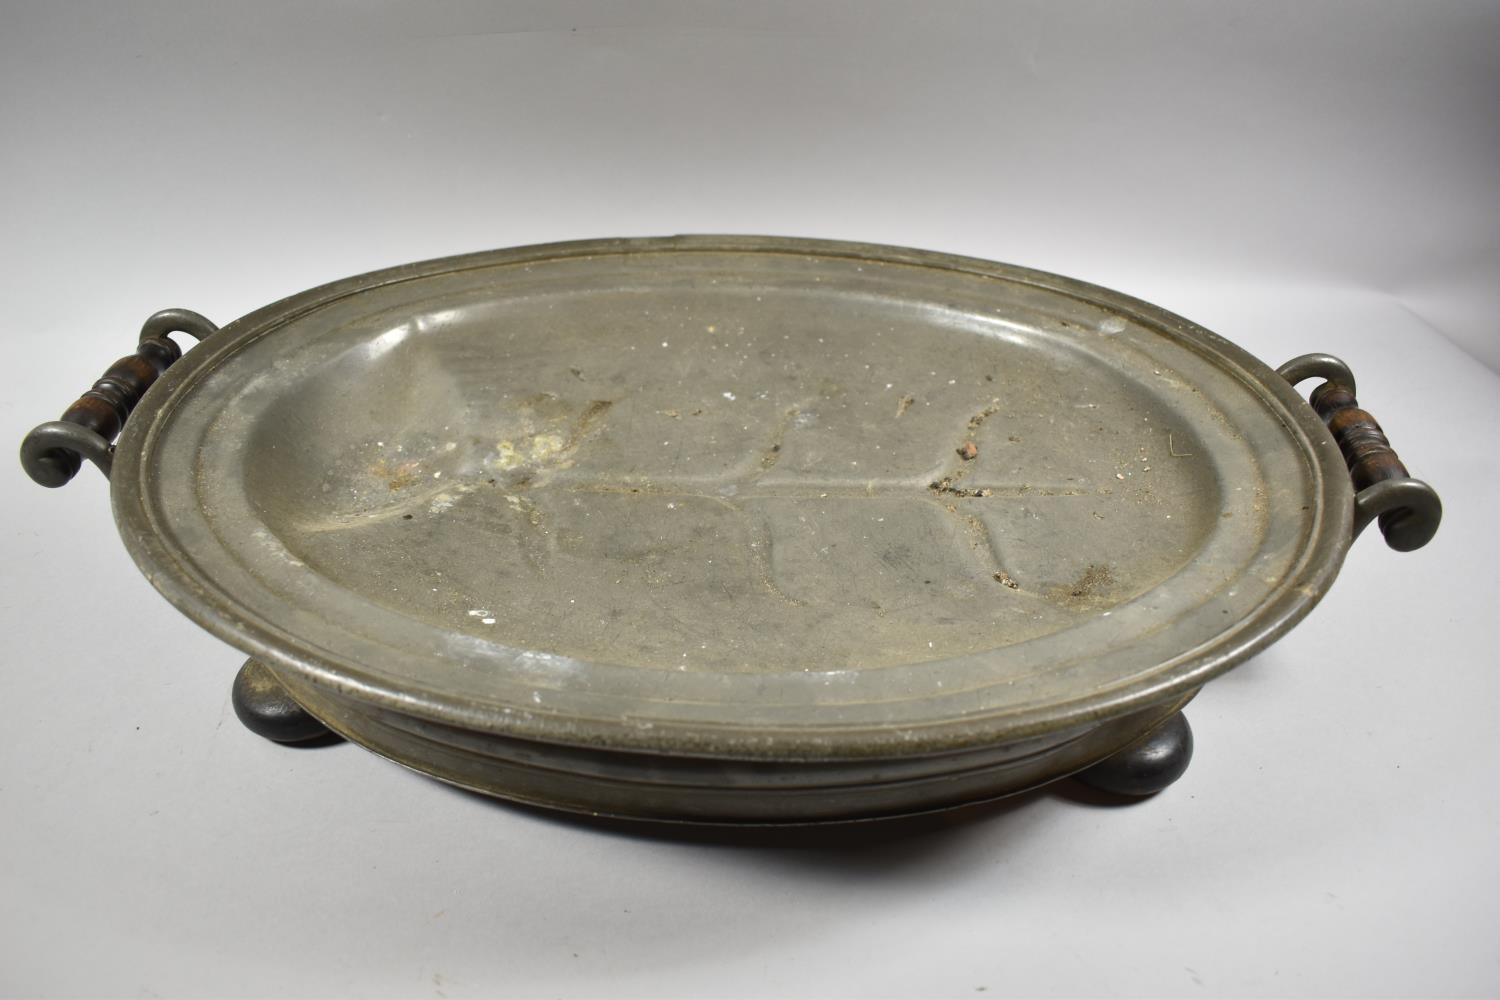 Two James Dixon & Sons Pewter Meat Warming Dishes with Wooden Bun Feet and Turned Wooden Handles, - Image 2 of 4